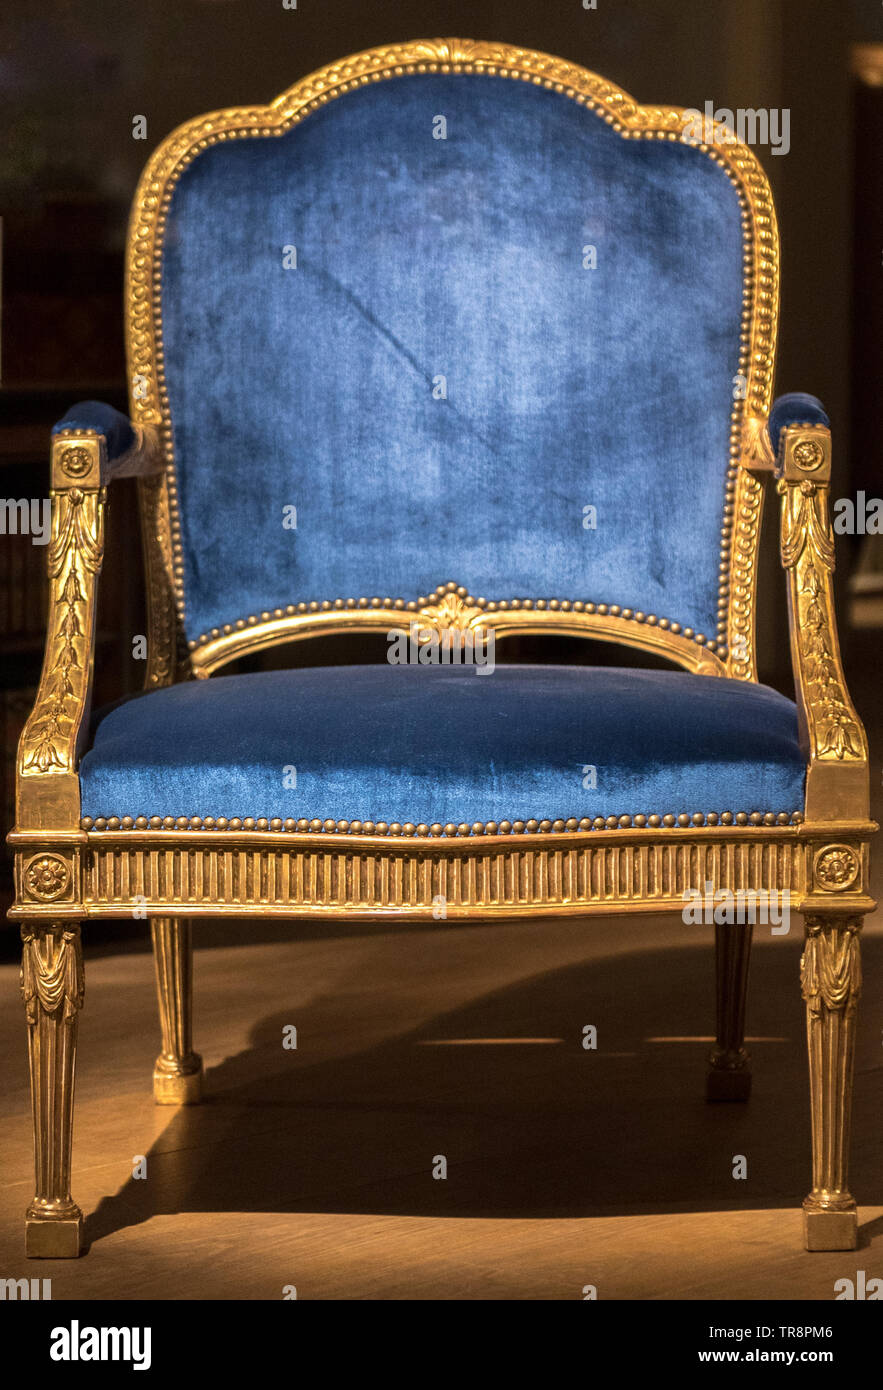 Large Blue Fabric Throne Chair with Gold Frame in Spotlight Stock Photo